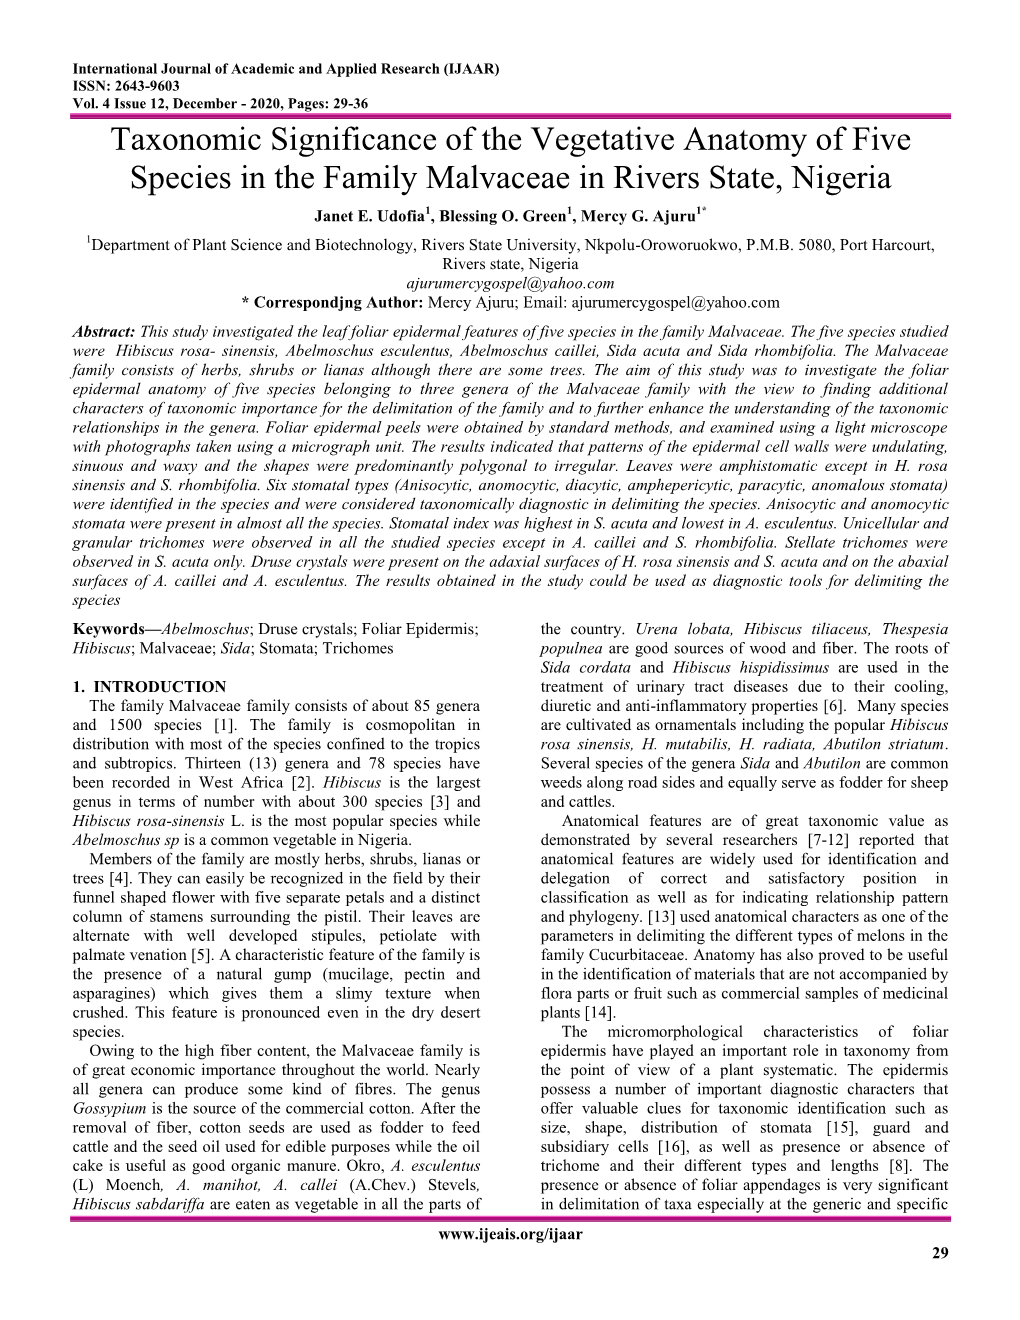 Taxonomic Significance of the Vegetative Anatomy of Five Species in the Family Malvaceae in Rivers State, Nigeria Janet E